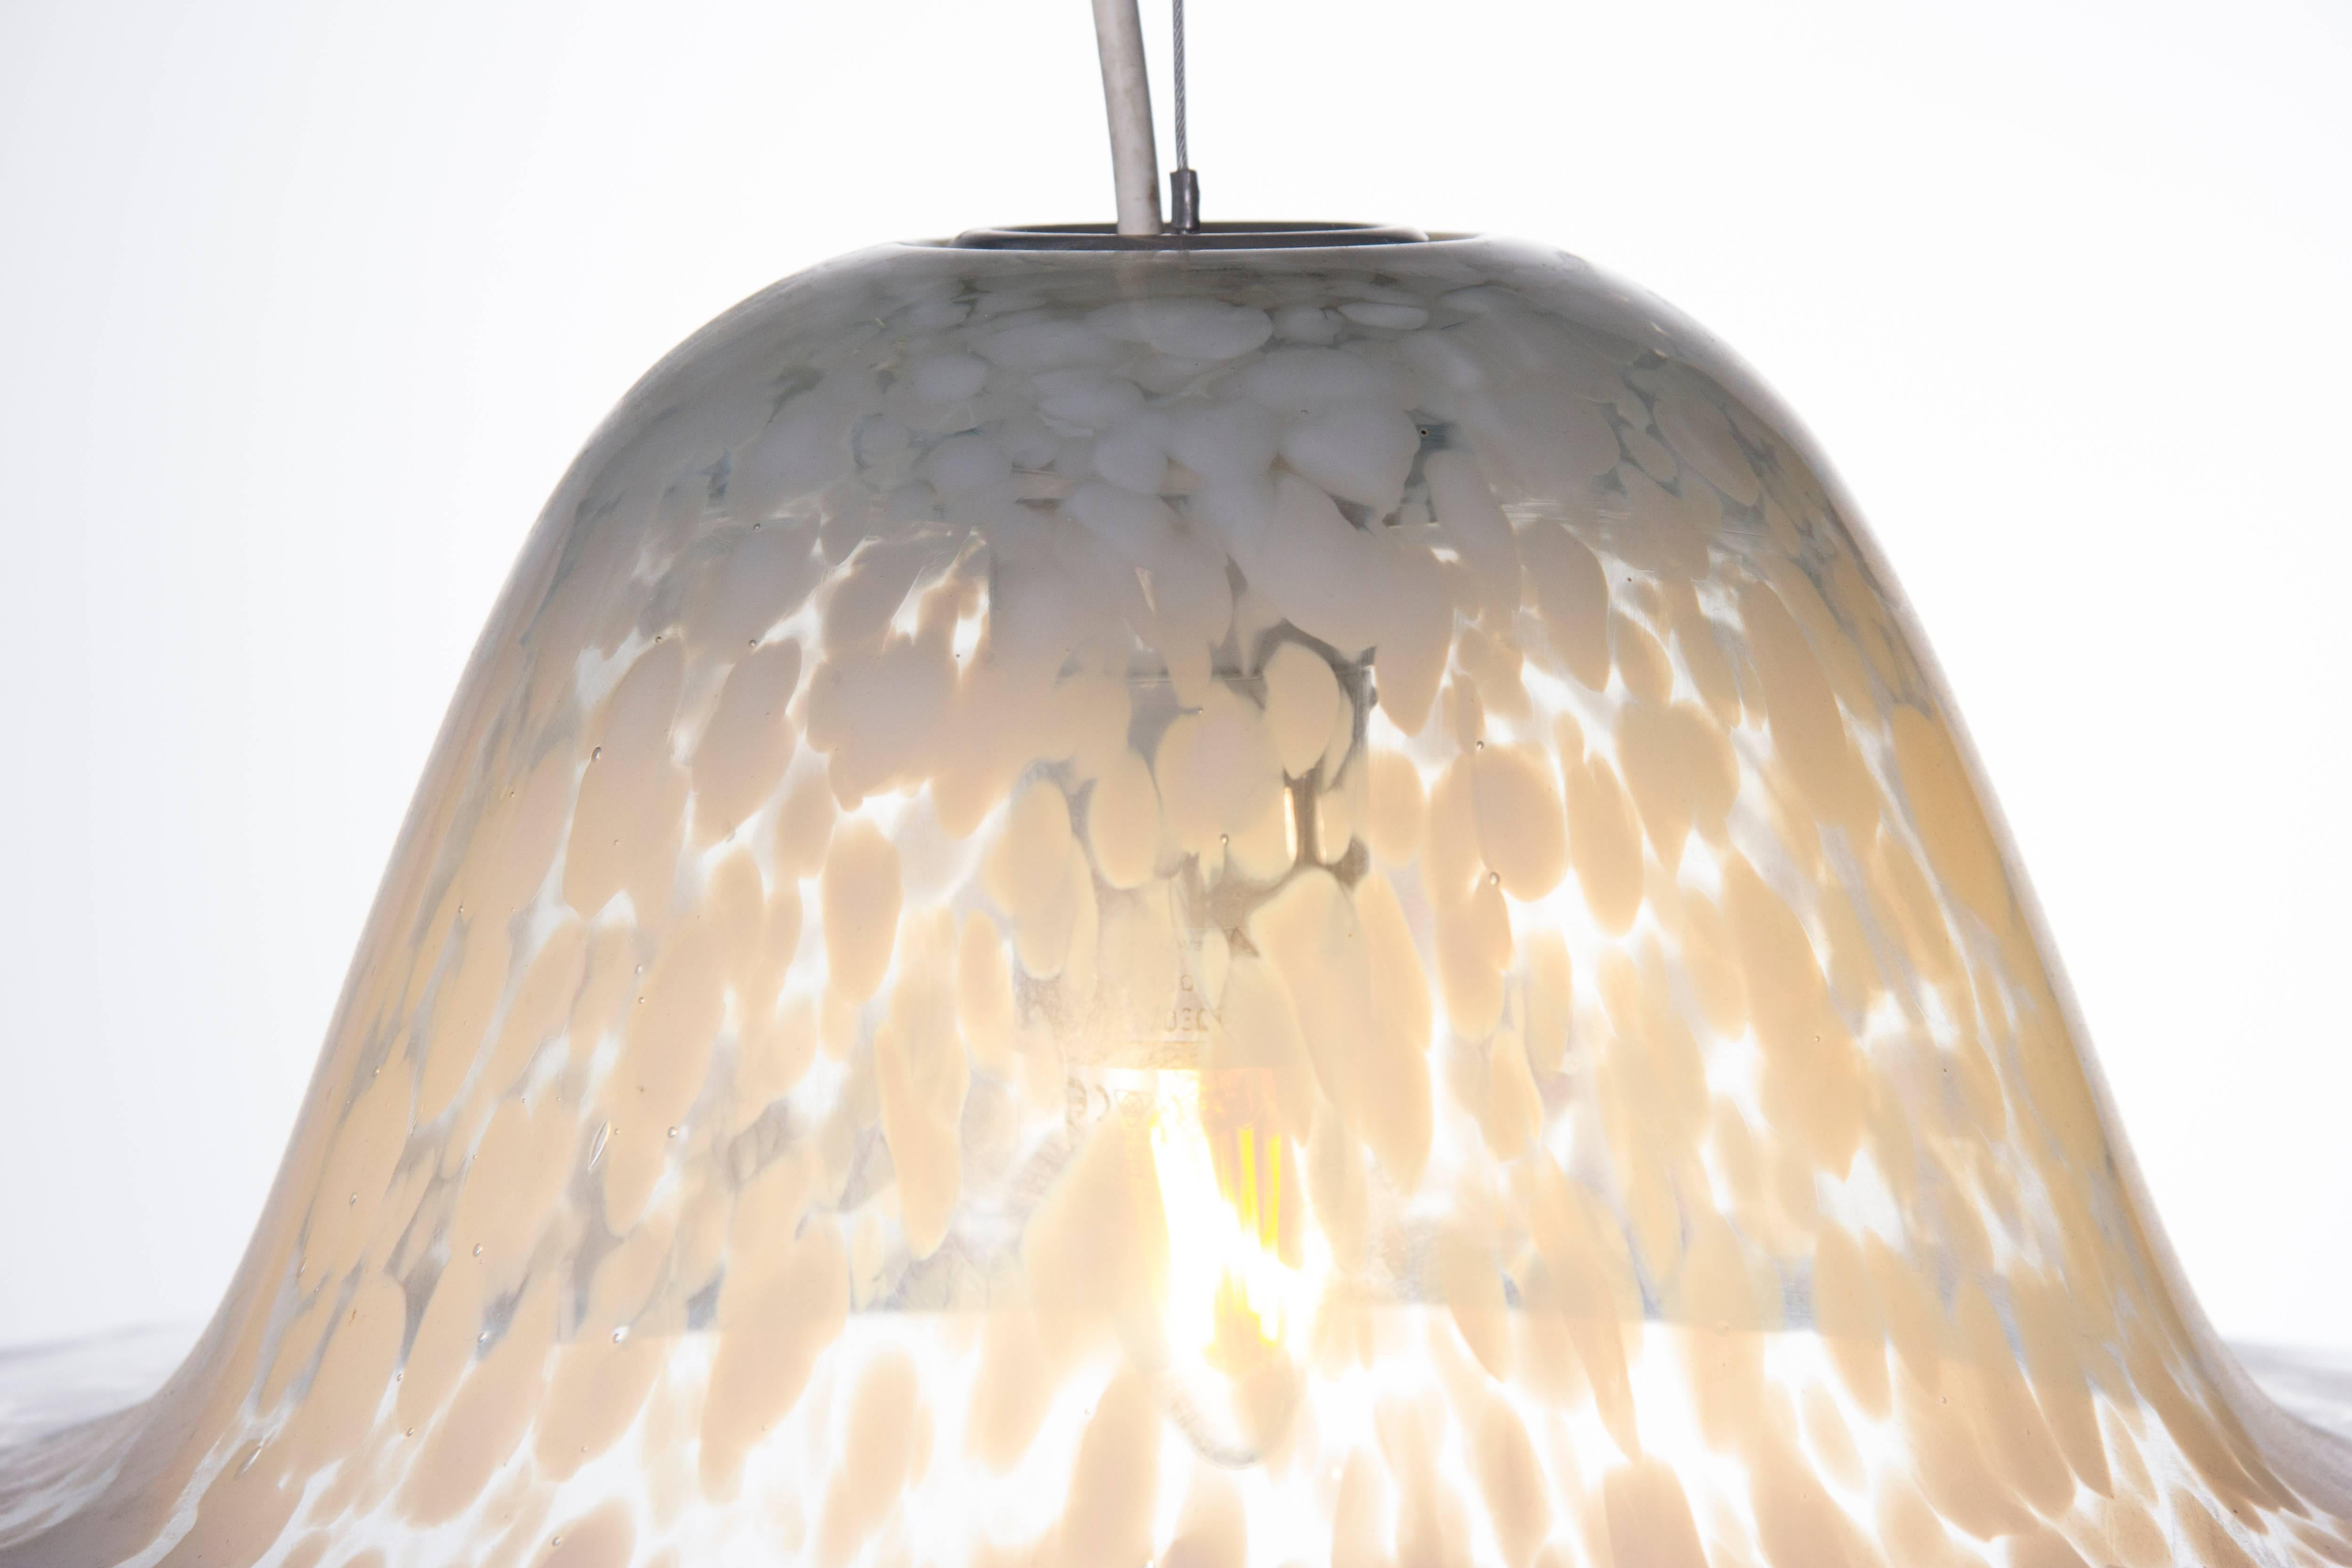 Vintage 1970s German mottled glass hanging light in the shape of a flying saucer designed by Aloys Ferdinand Gangkofner for Peill & Putzler. The height can be adjusted according to your exact requirements making it a perfect addition for a dining